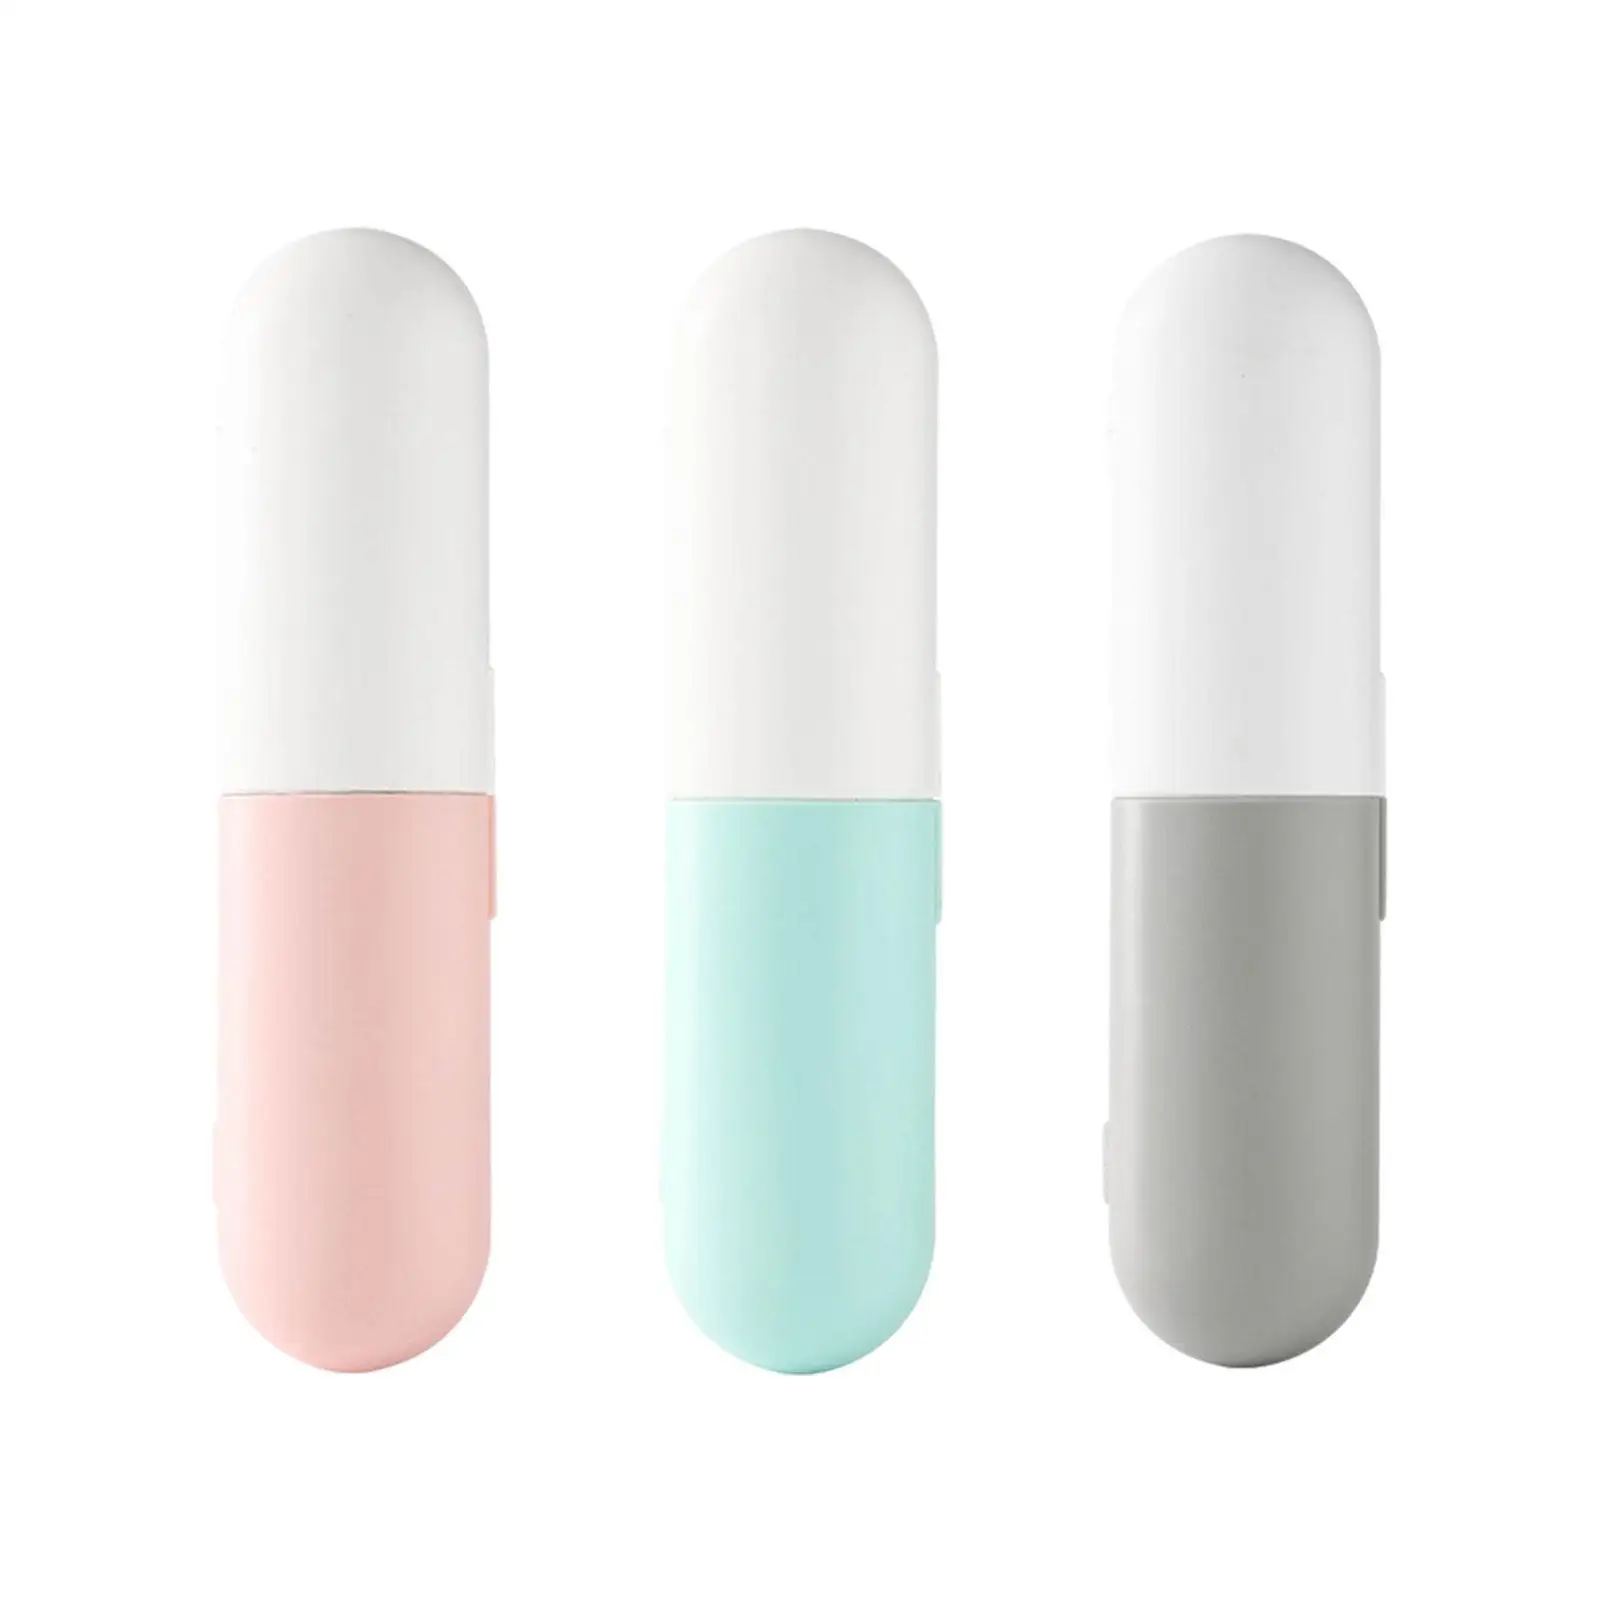 Portable Toothbrush Sanitizer Smart Toothbrush Cover Tooth Brush Travel Case Toothbrush Cleaner Holder for Bathroom Travel Home